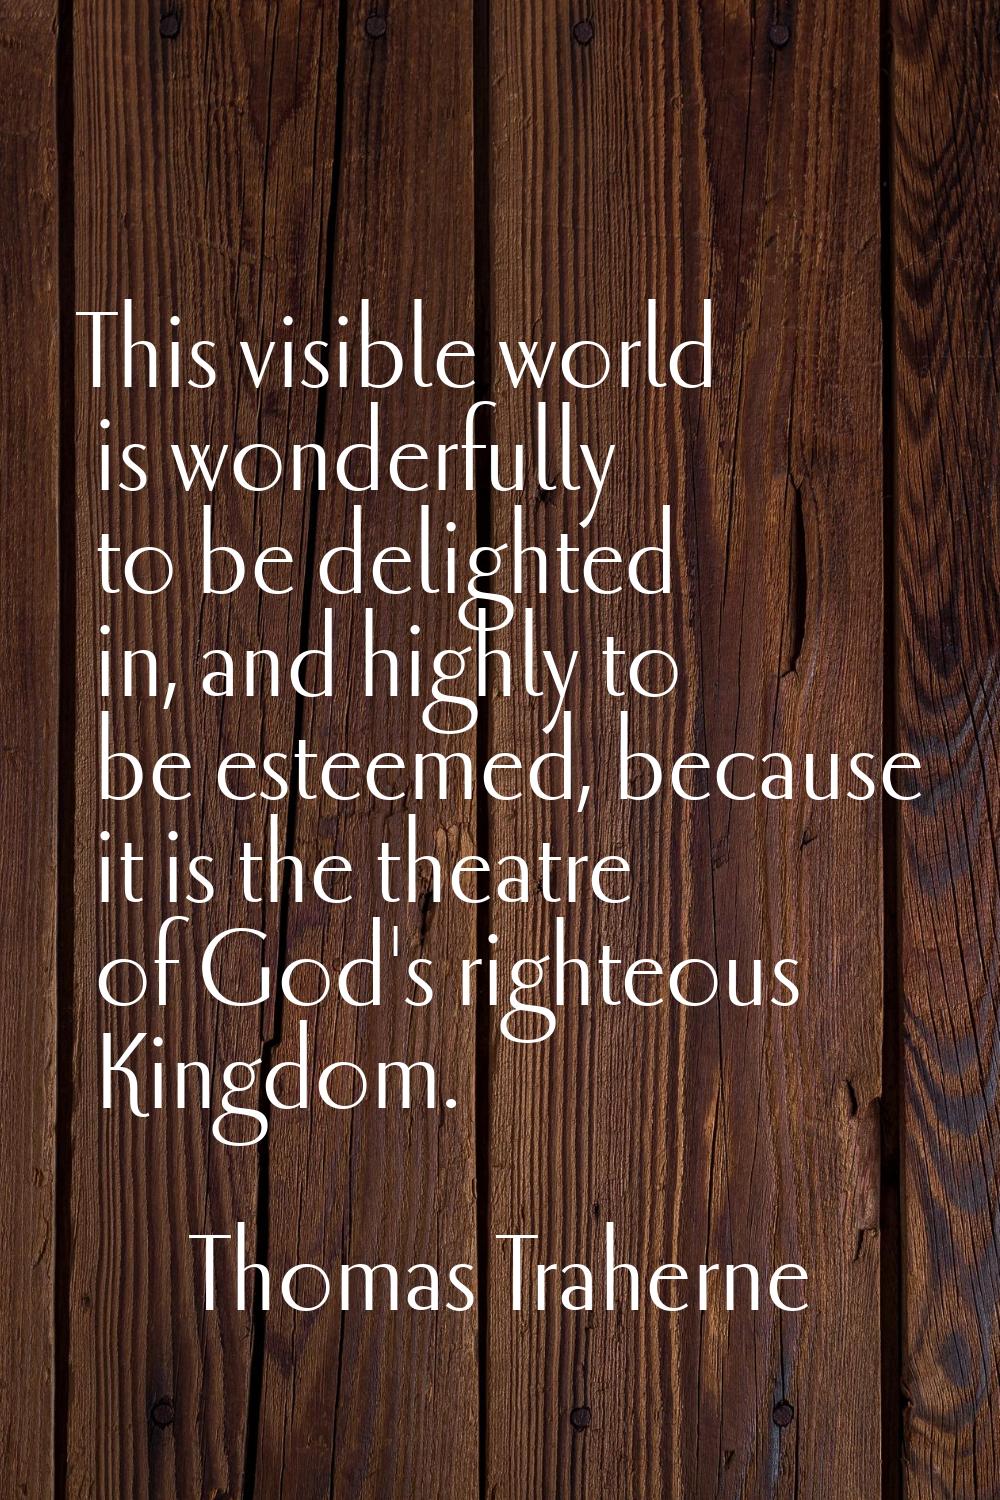 This visible world is wonderfully to be delighted in, and highly to be esteemed, because it is the 